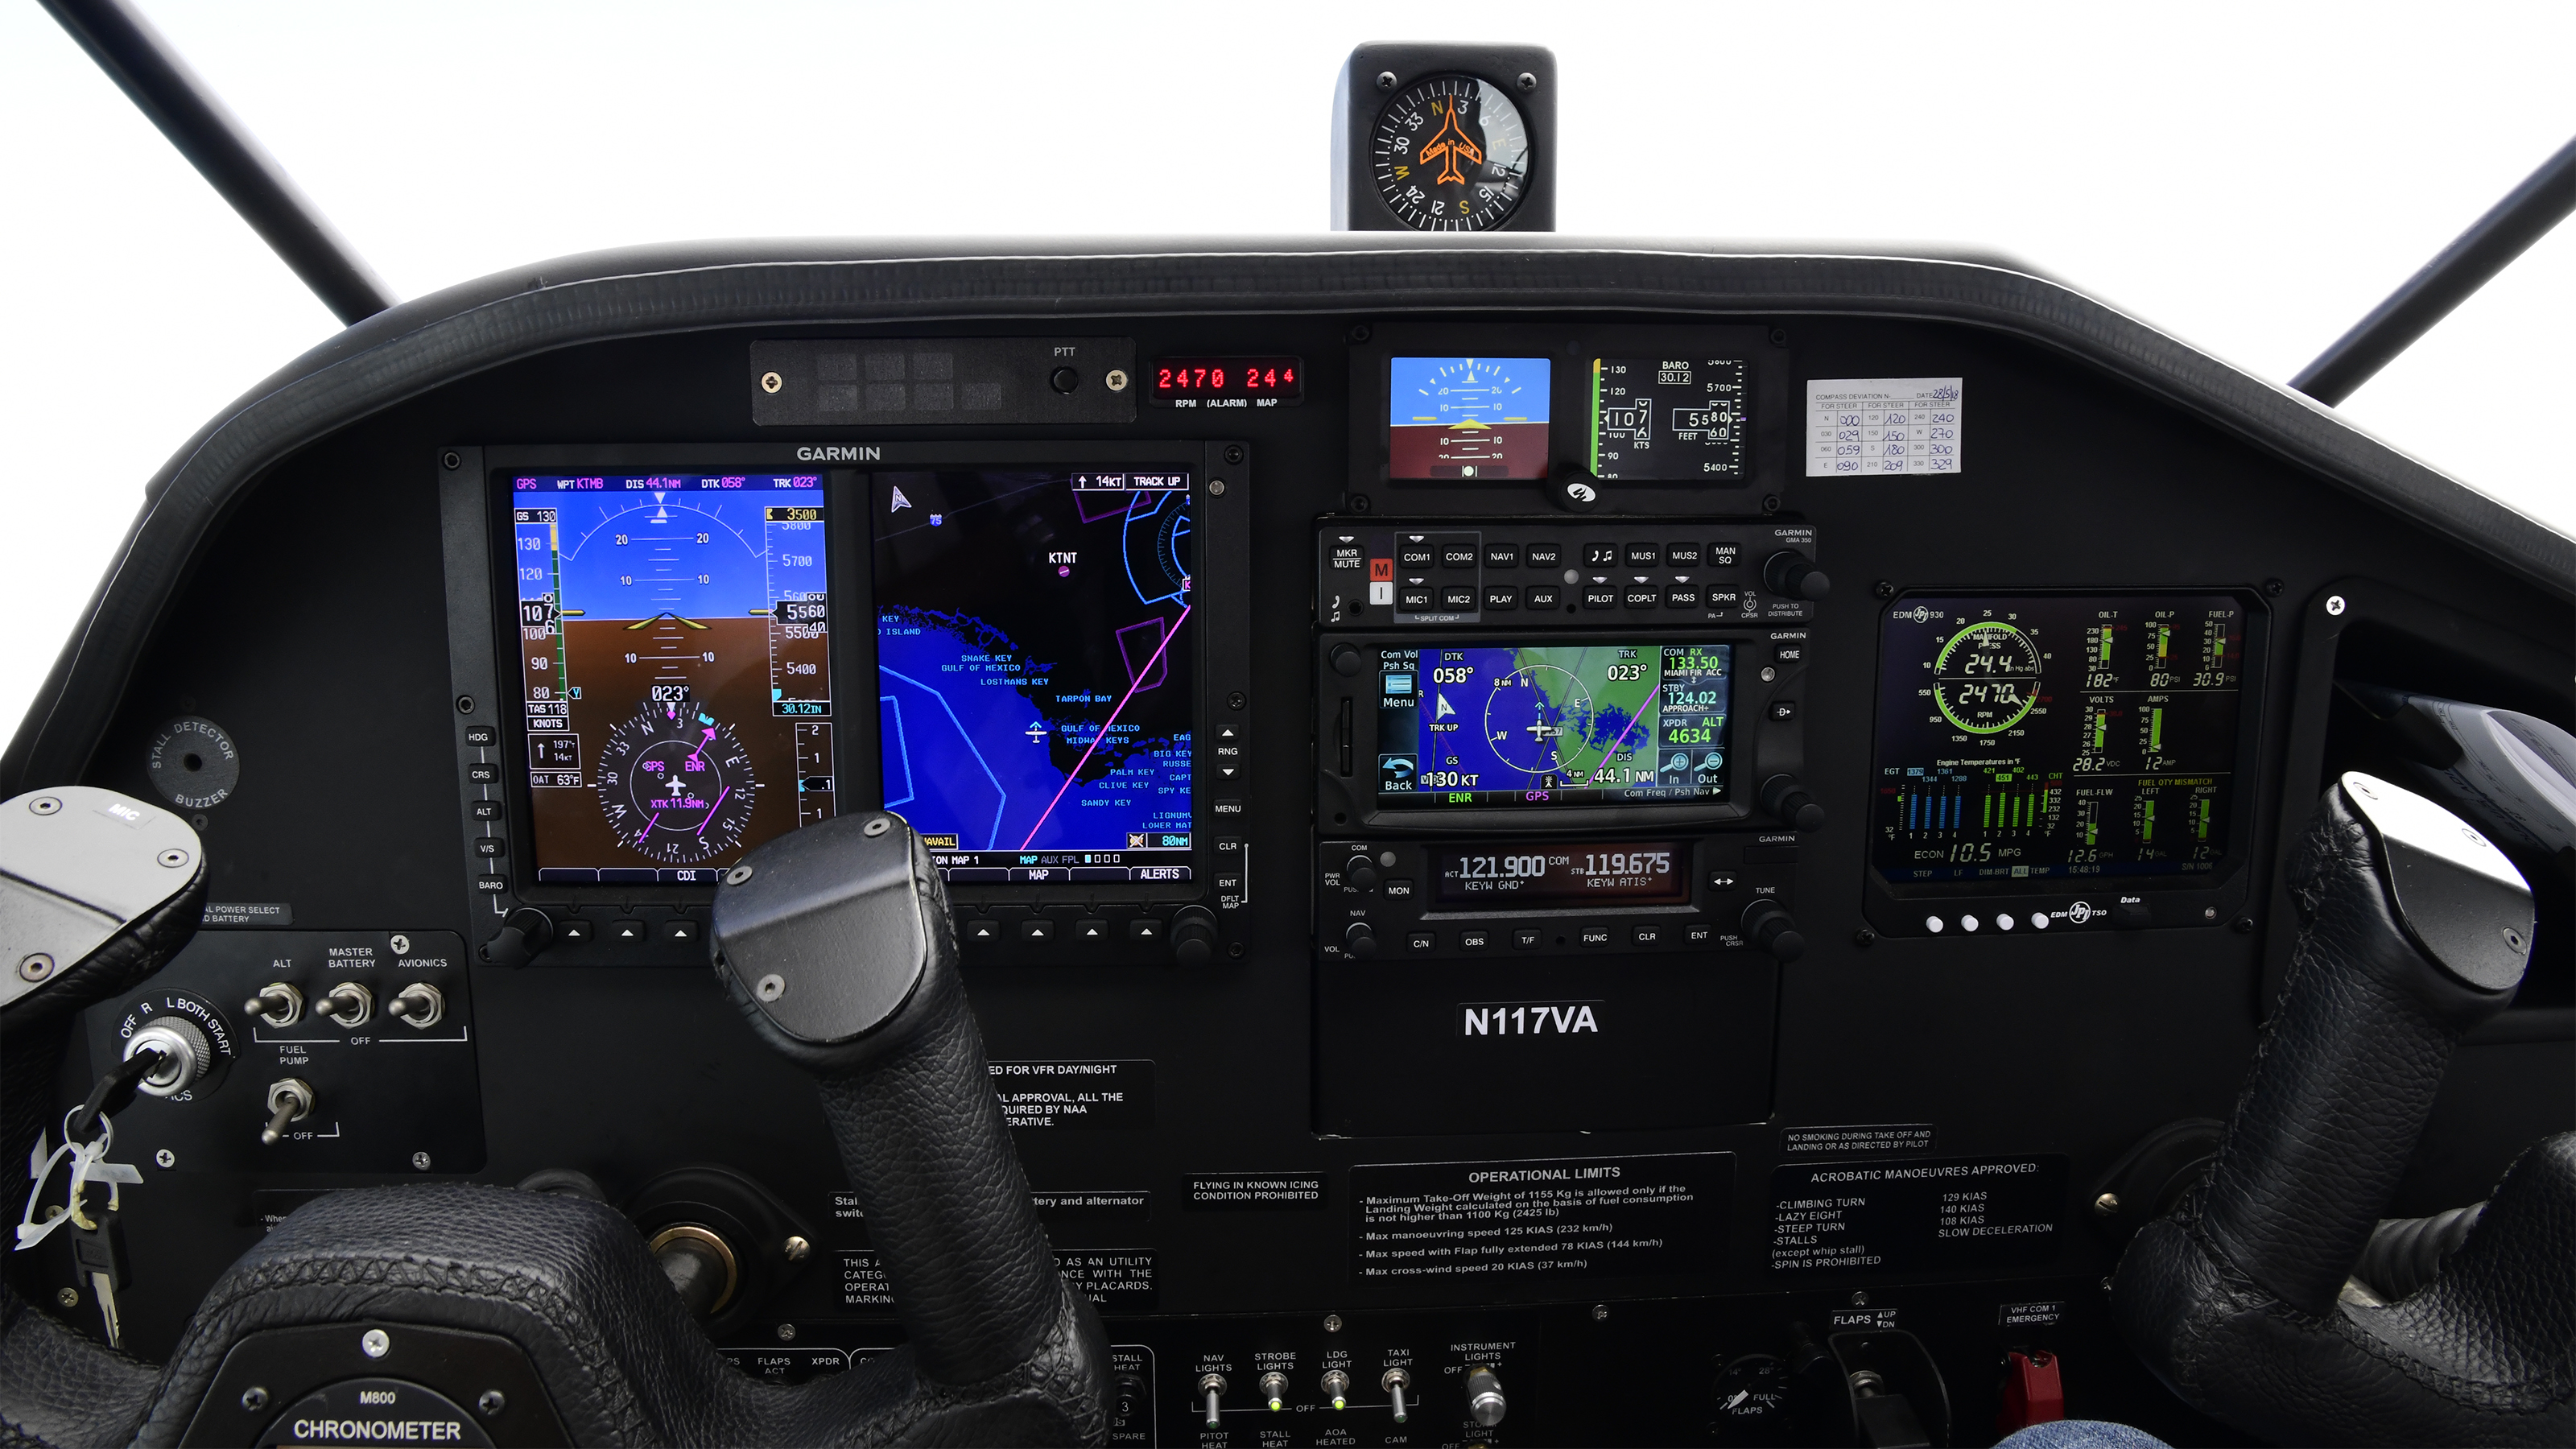 The 2018 Vulcanair V1.0 has a Garmin G500 digital panel and good visibility through side, forward, rear, and skylight windows over the Florida Keys, Aug. 12, 2018. Future models will be outfitted with a Garmin G500 TXi digital panel. Photo by David Tulis